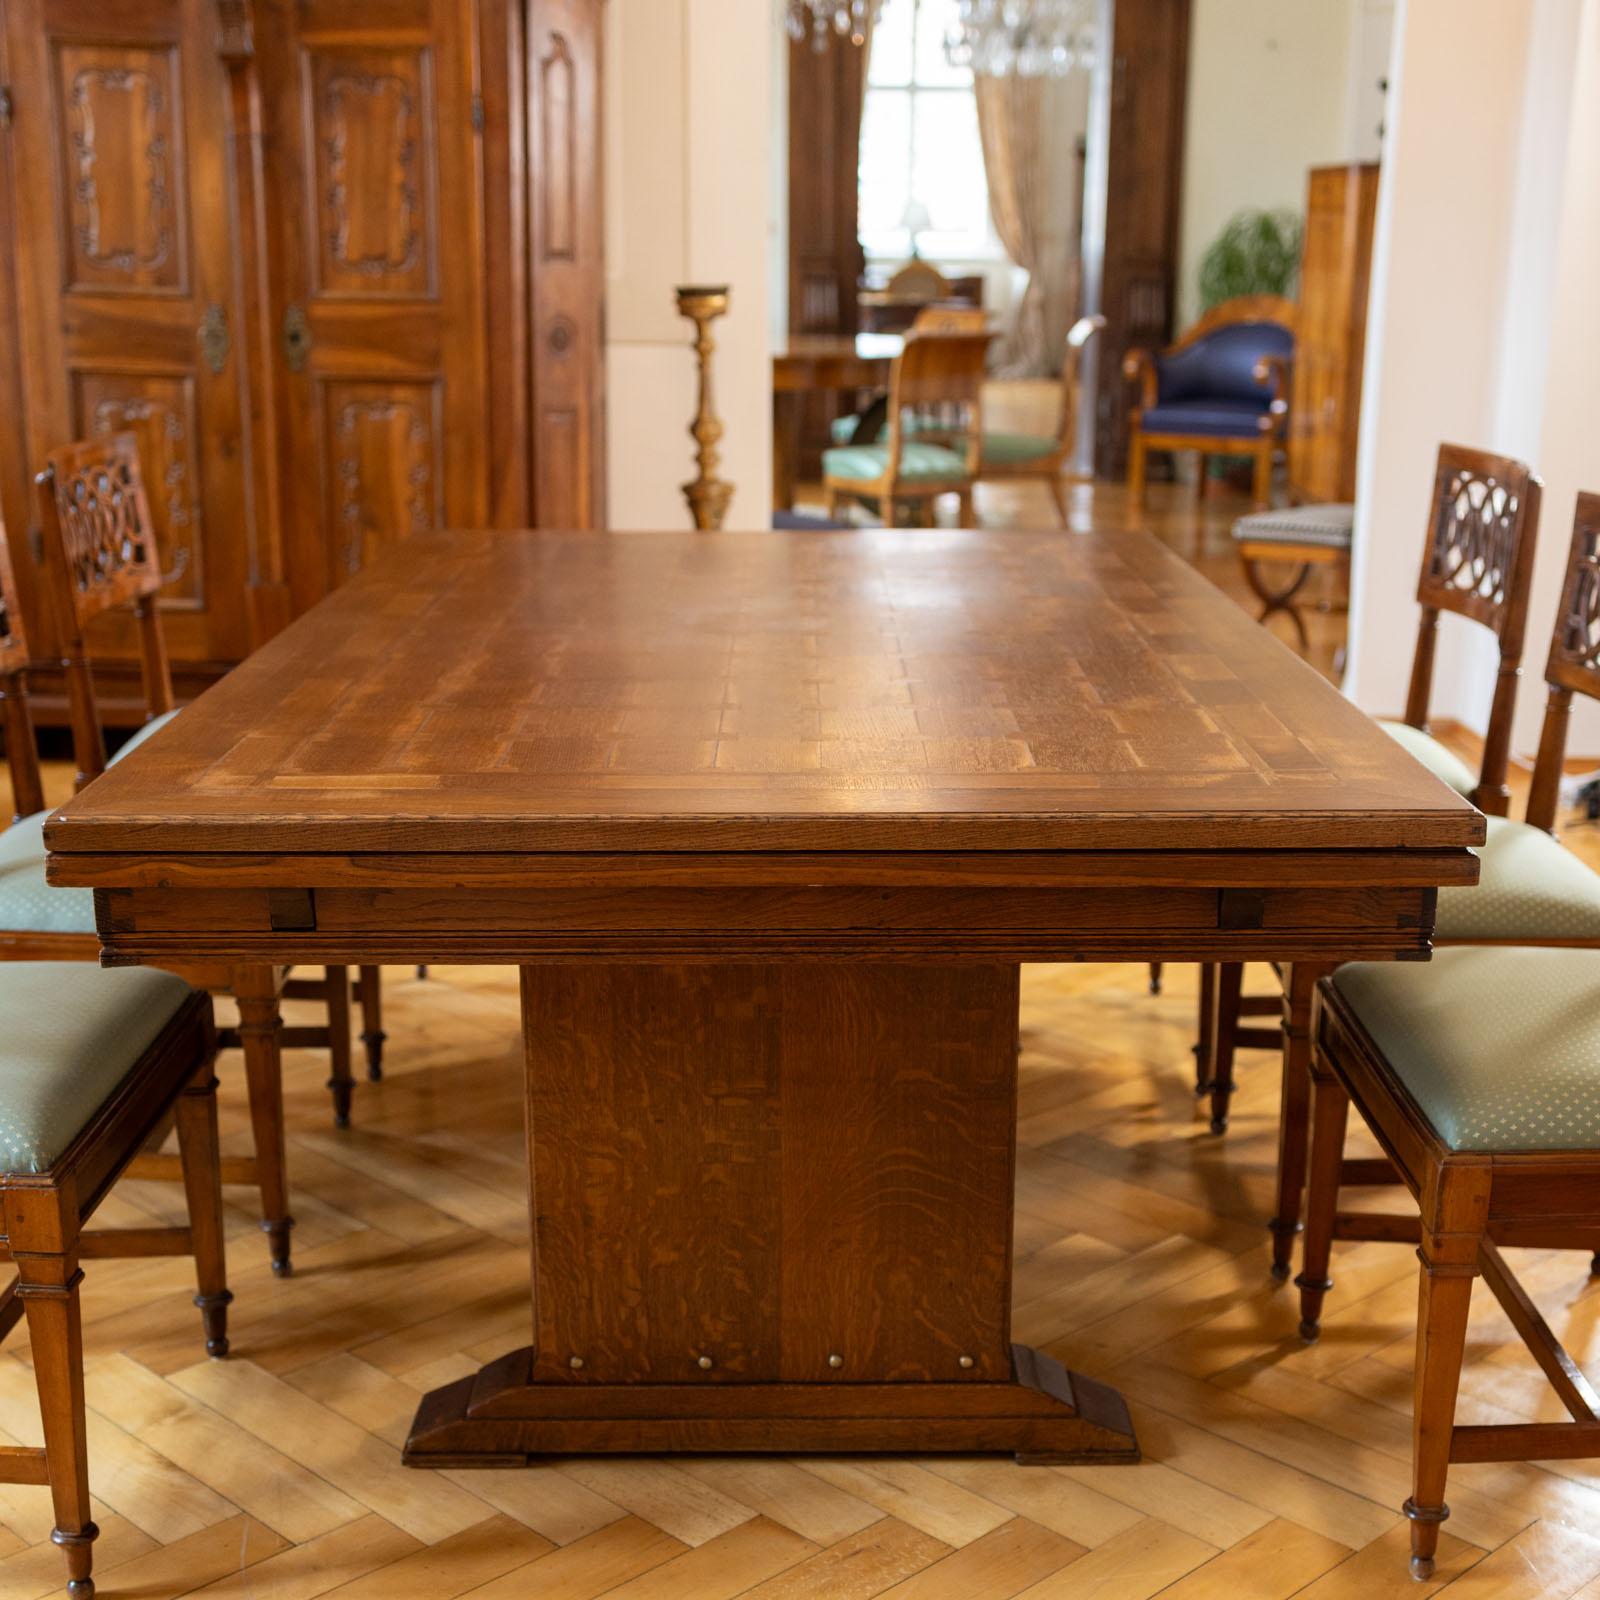 Large Art Nouveau extending table made of oak with a rectangular table top and two pull-out surfaces on the narrow sides. The table tops show a beautiful parquetry pattern. The maximum length is 360 cm. The table rests on two side panels with brass